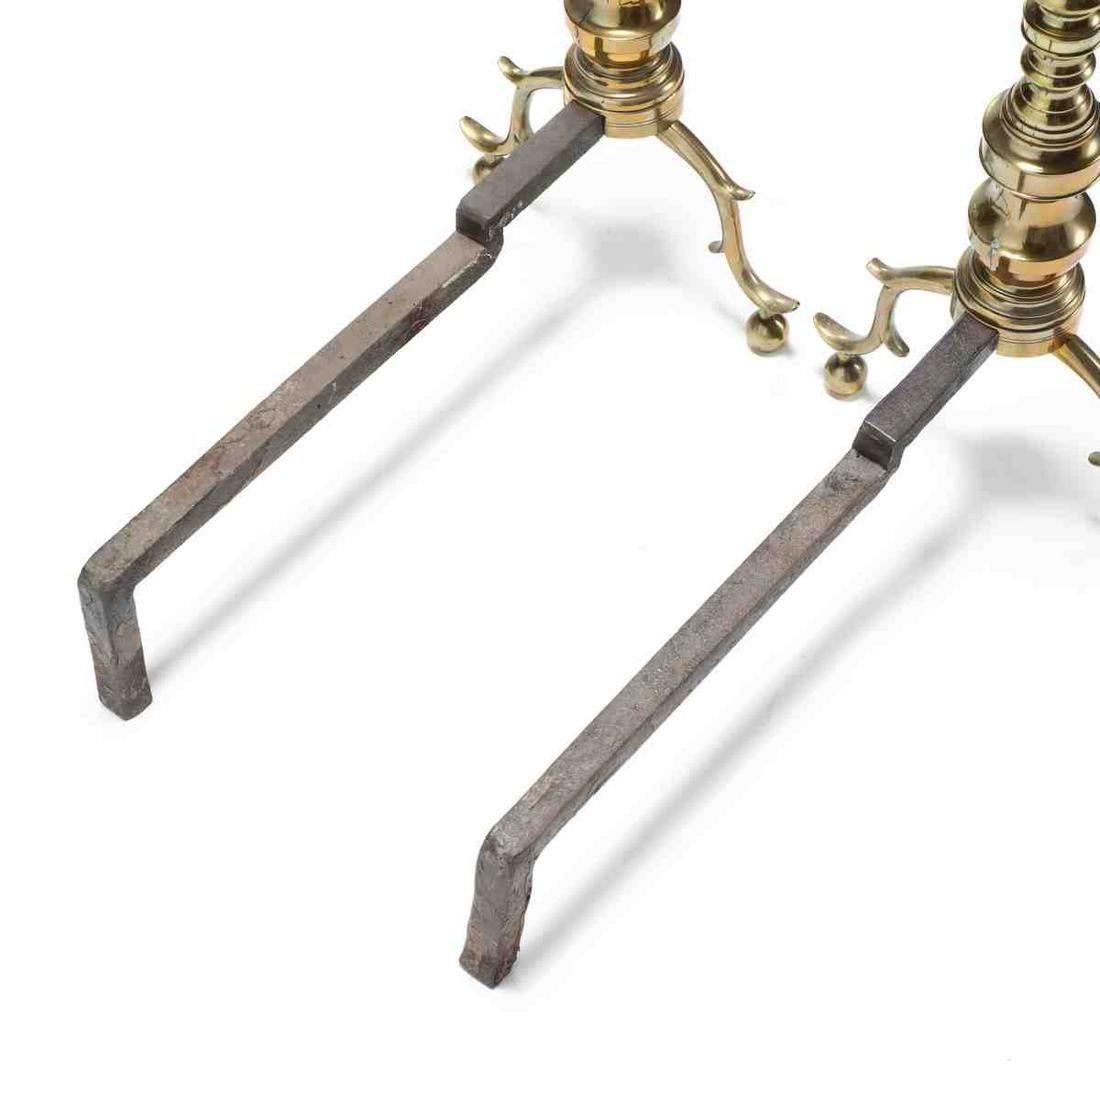 A uniquely handsome pair of Chippendale style brass andirons. Molded brass form with spur knee and ball feet.